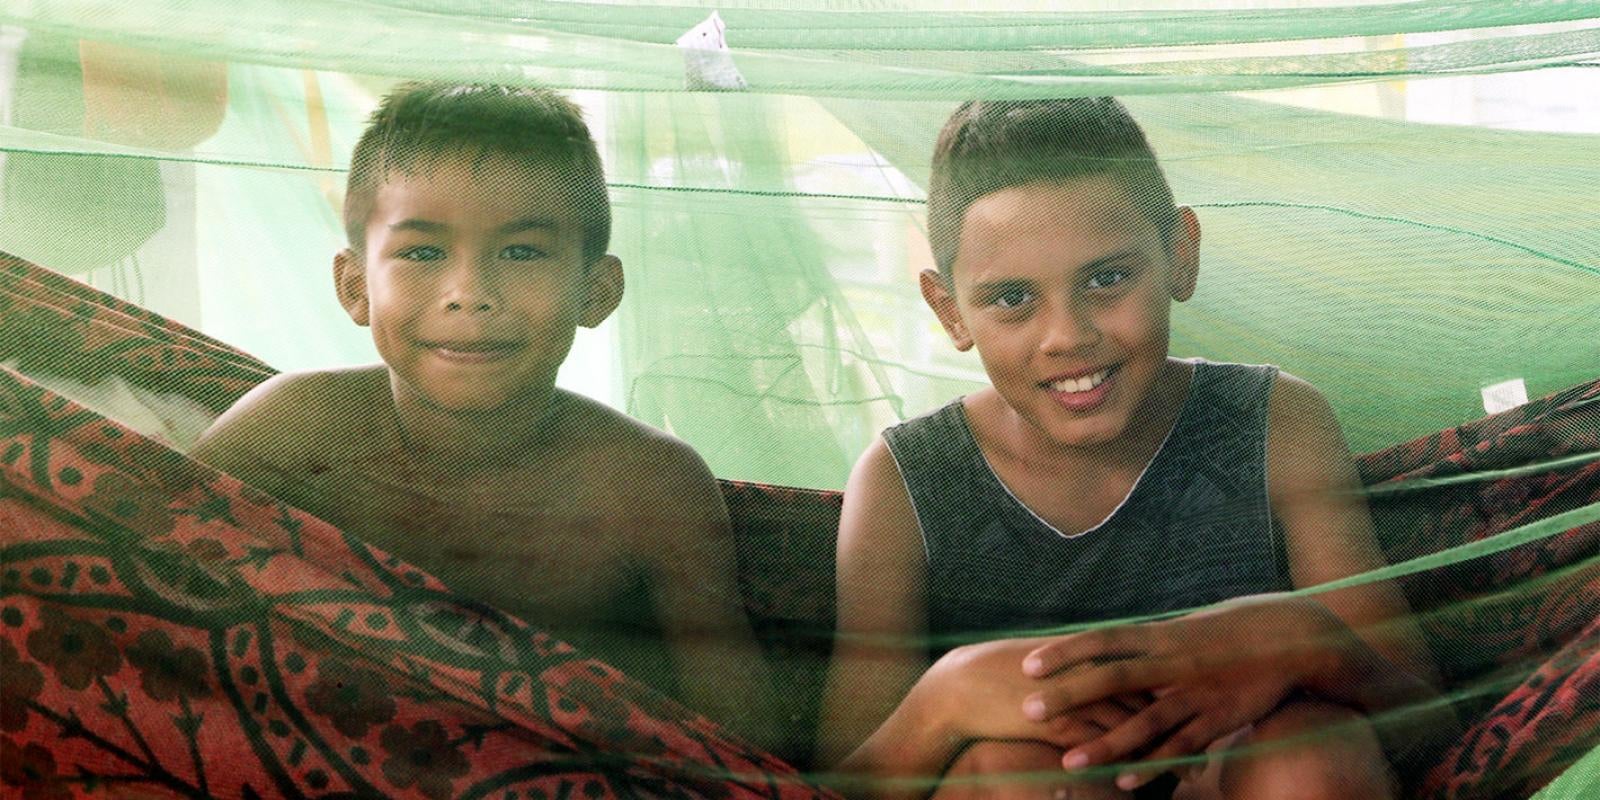 Two boys under a mosquito net